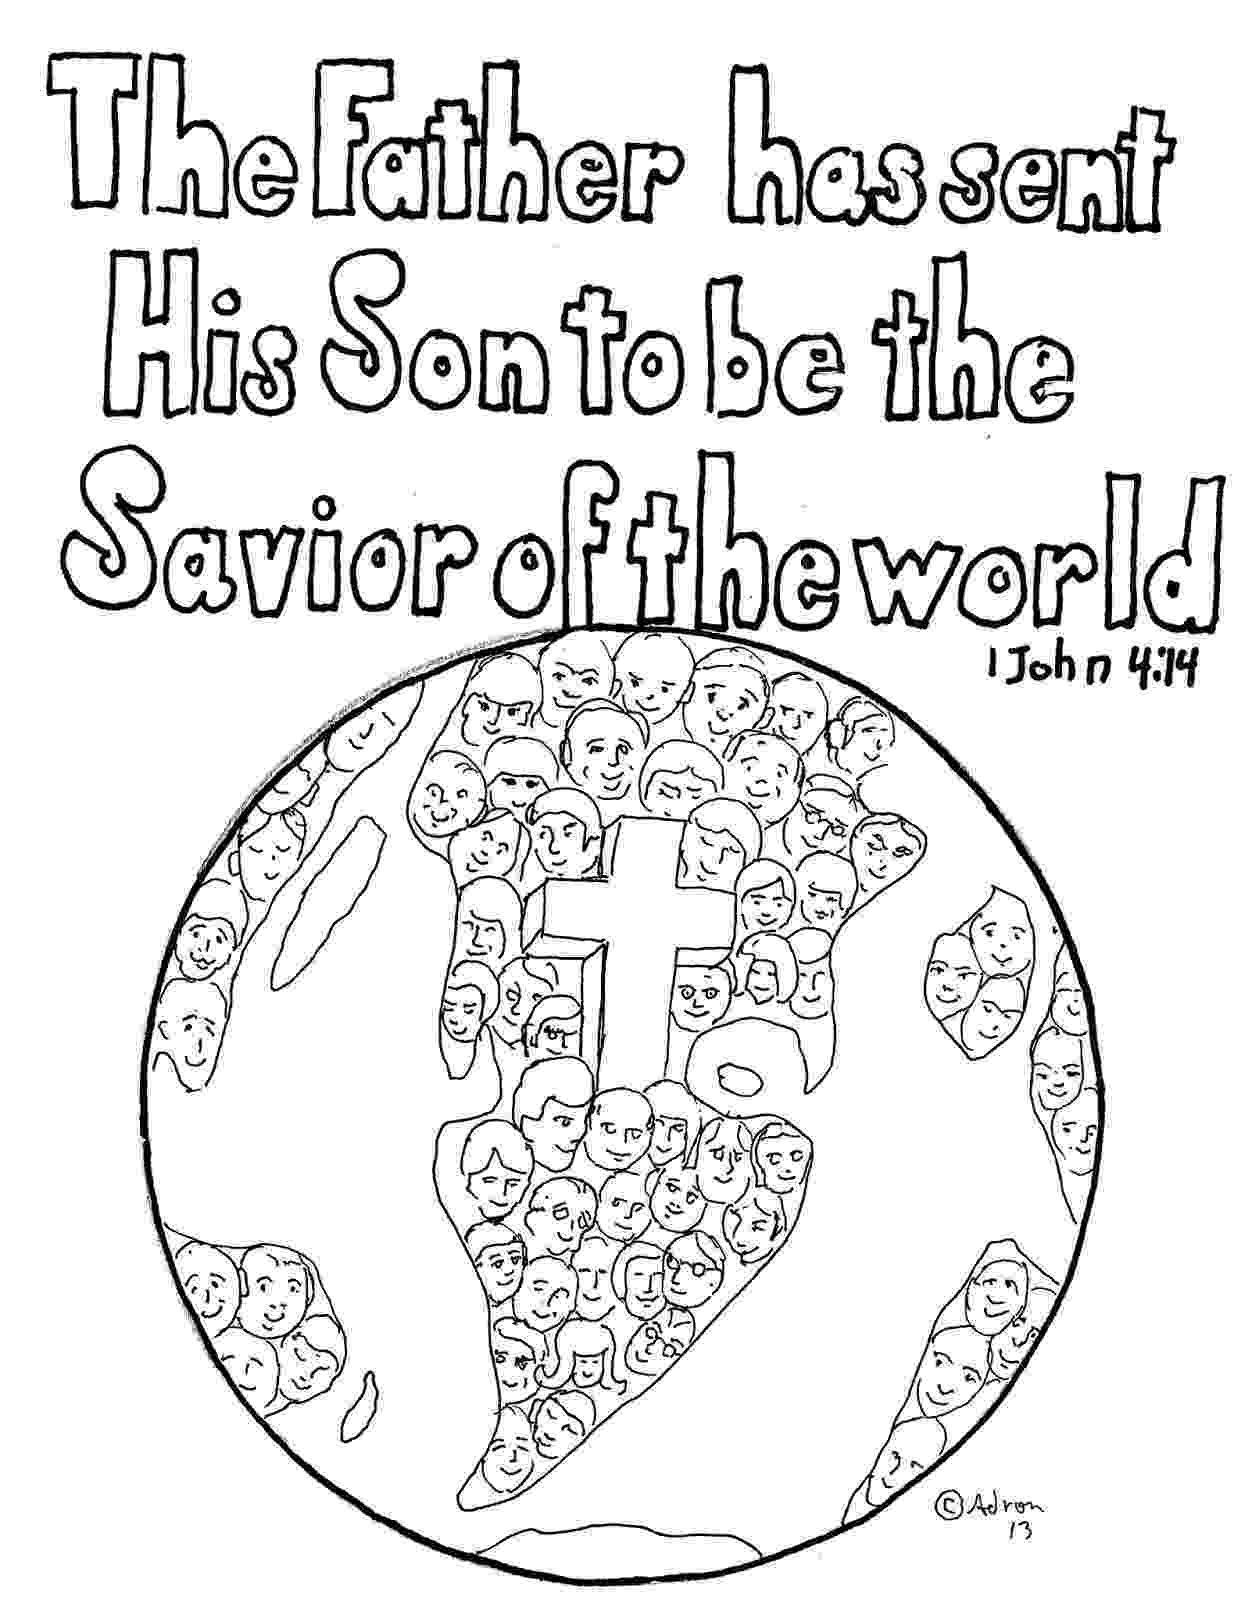 awana sparks coloring pages awana sparks coloring pages coloring pages pages awana coloring sparks 